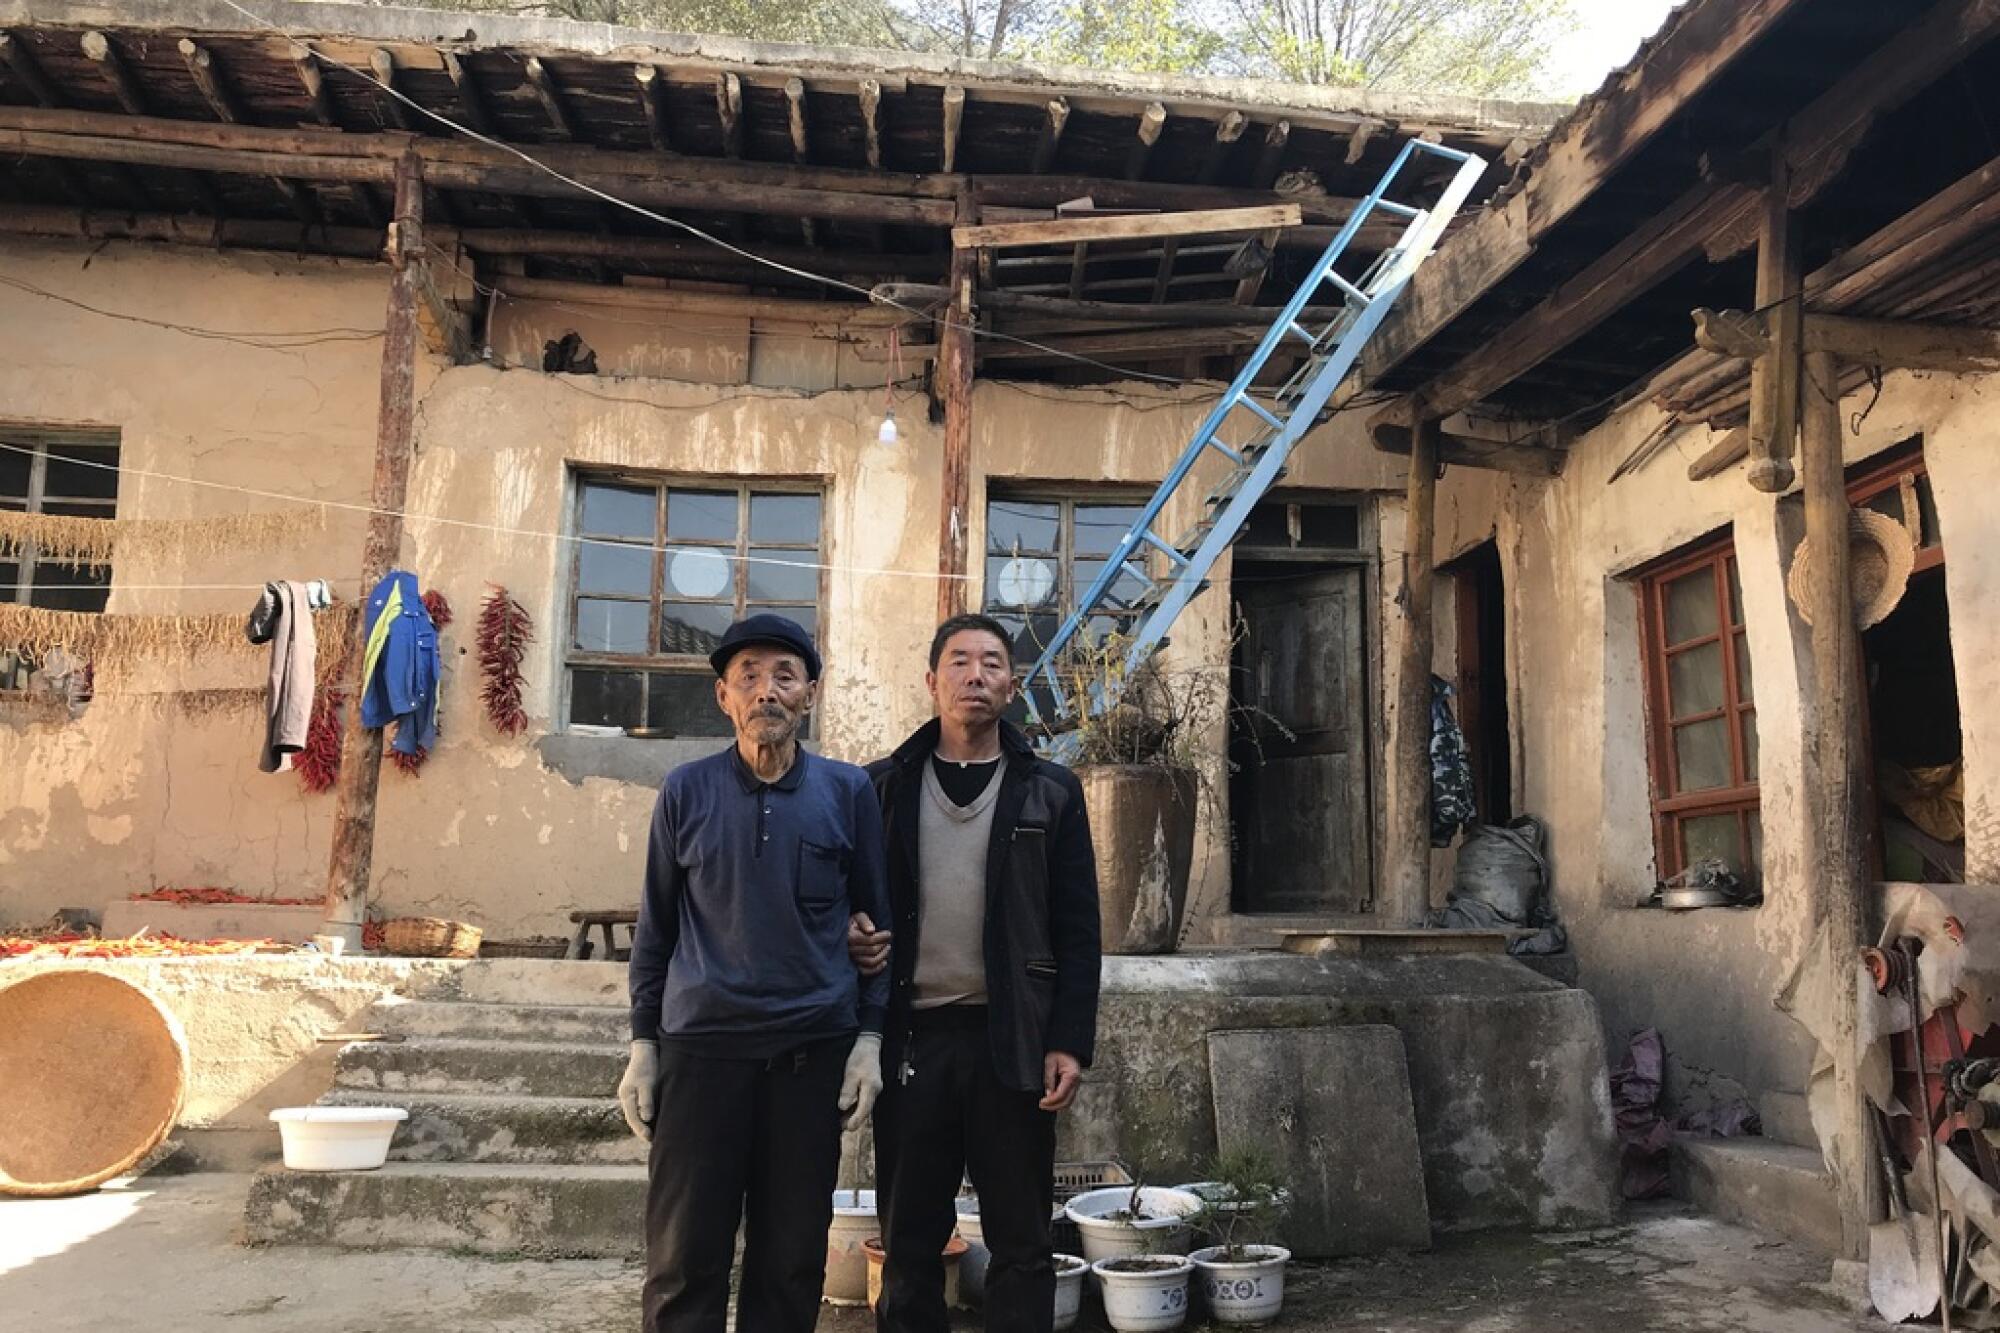 Yang Qinglai and his son Yang Jiacun are among a handful of residents still living in Lianghekou, China